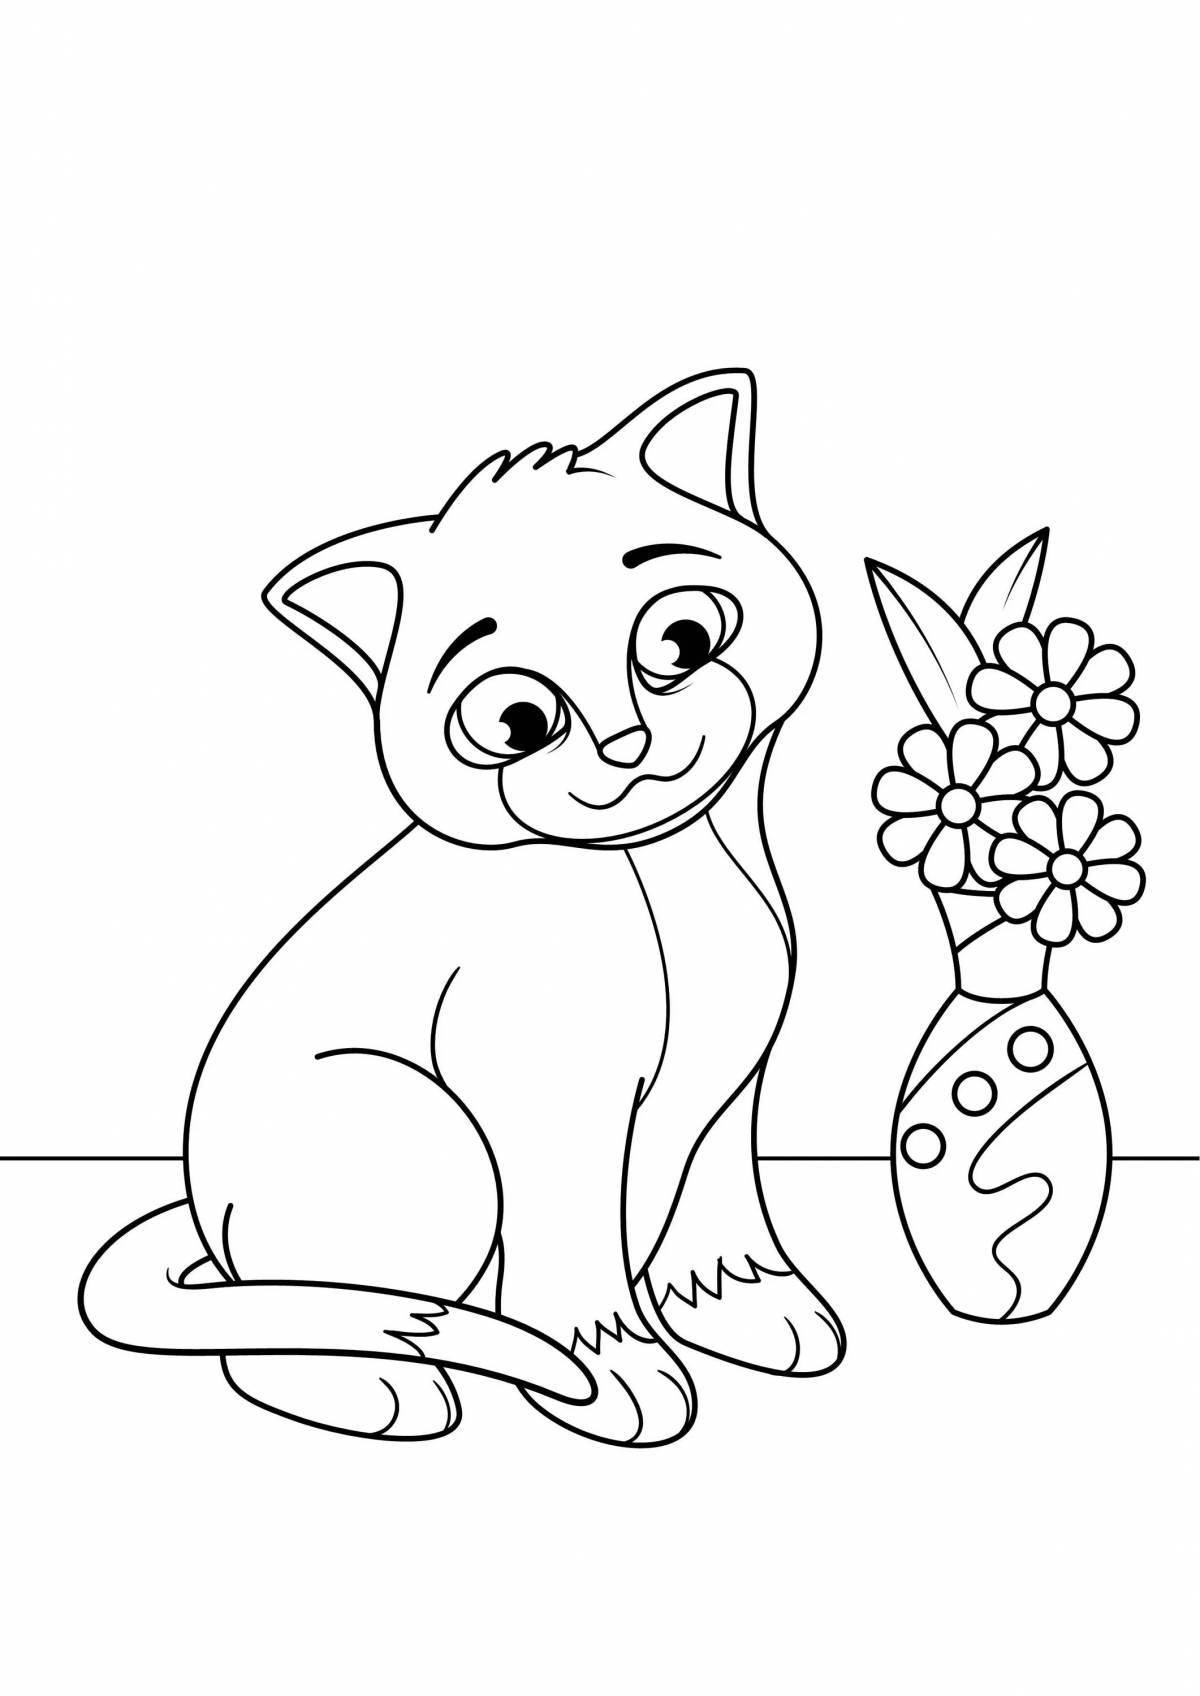 Tiny kitten coloring page